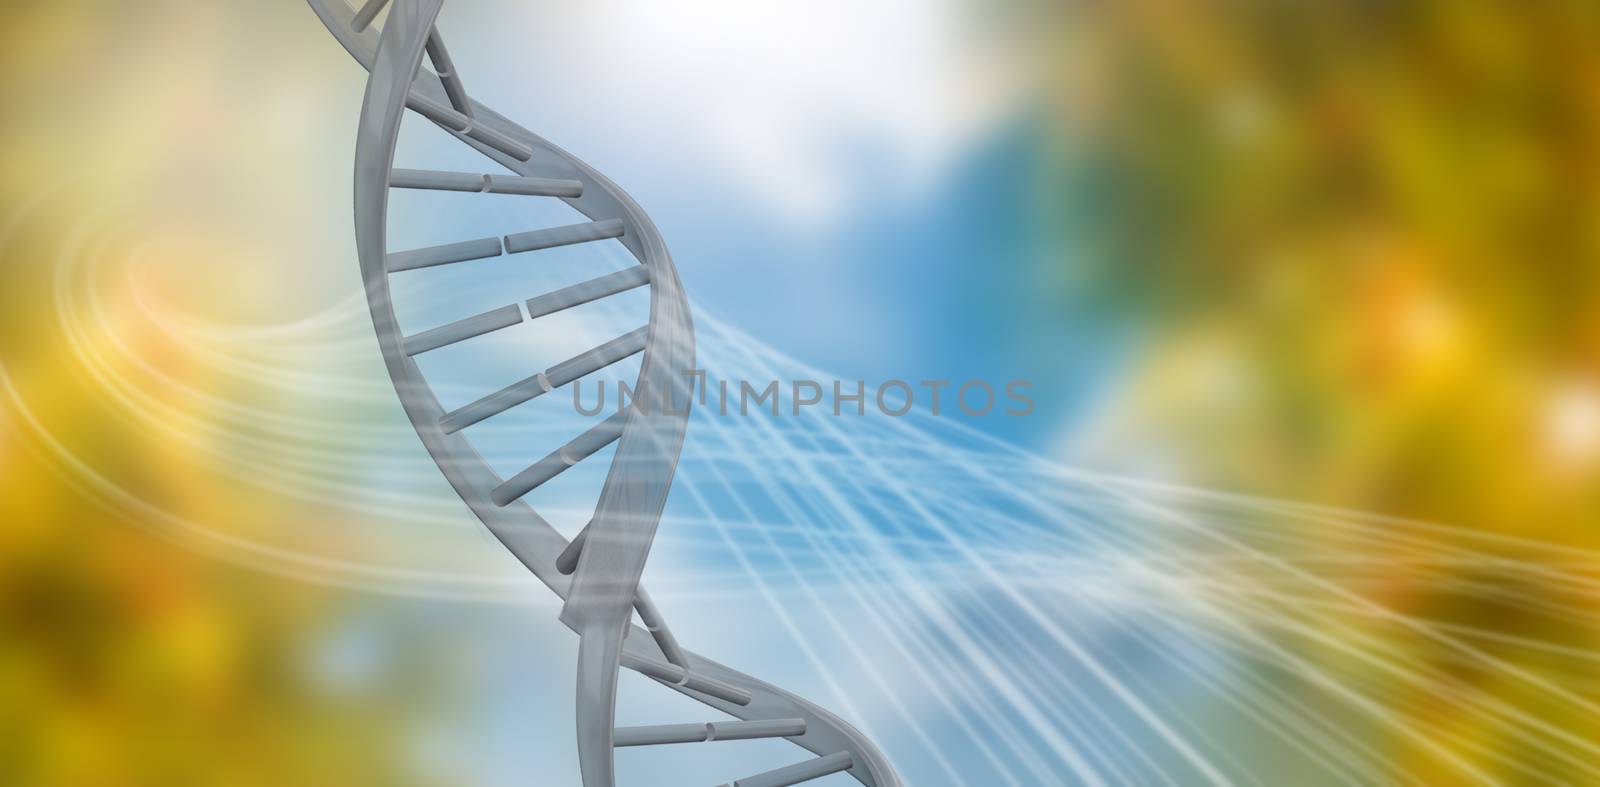 3d Image of dna helix against blue and orange background with shiny lines